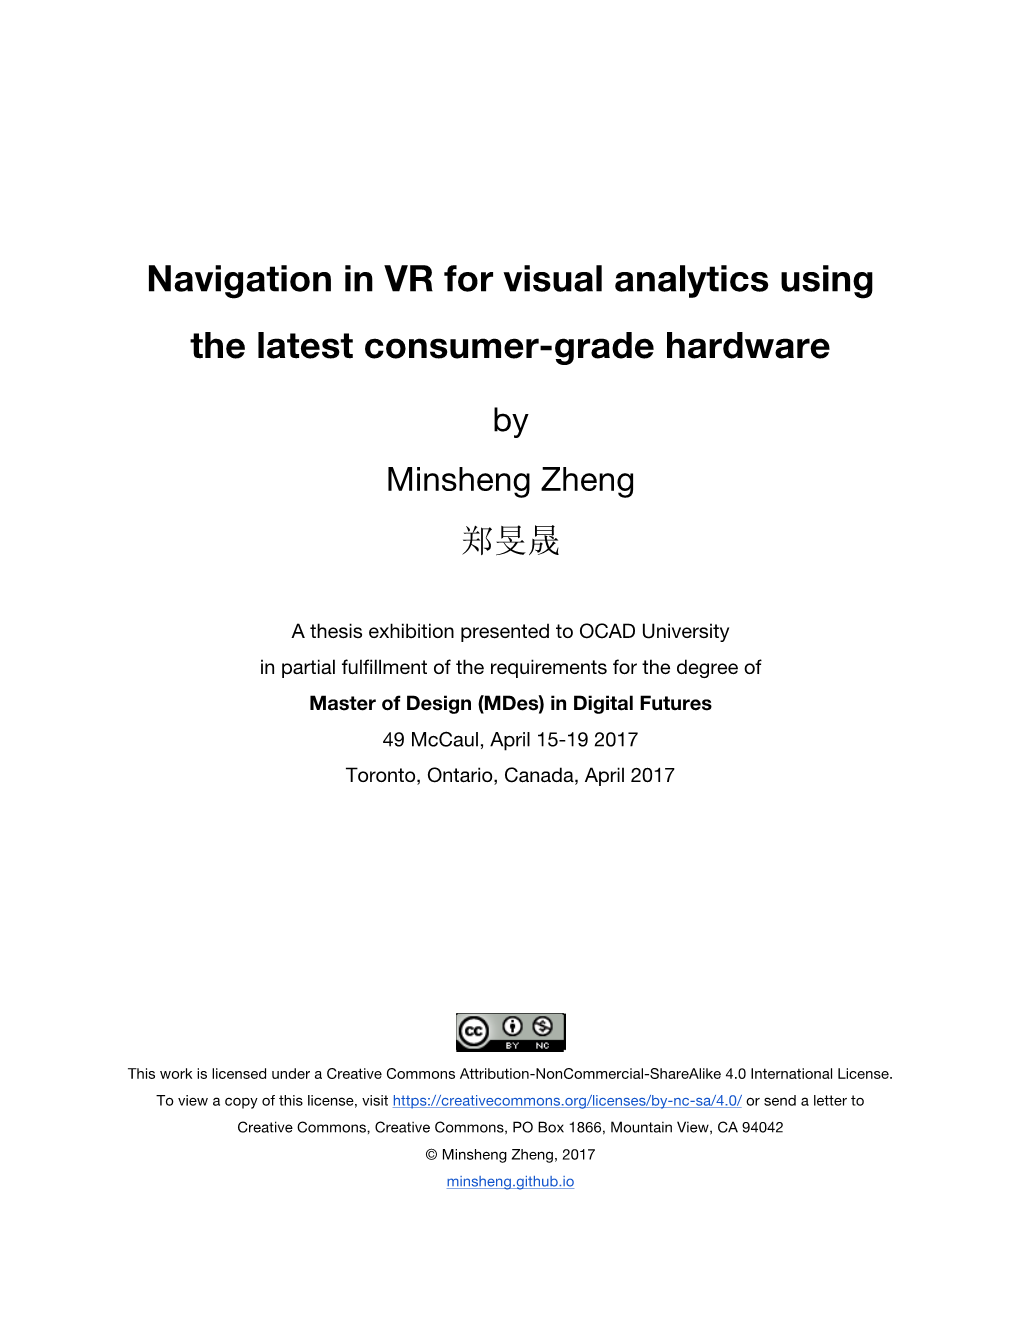 Navigation in VR for Visual Analytics Using the Latest Consumer-Grade Hardware